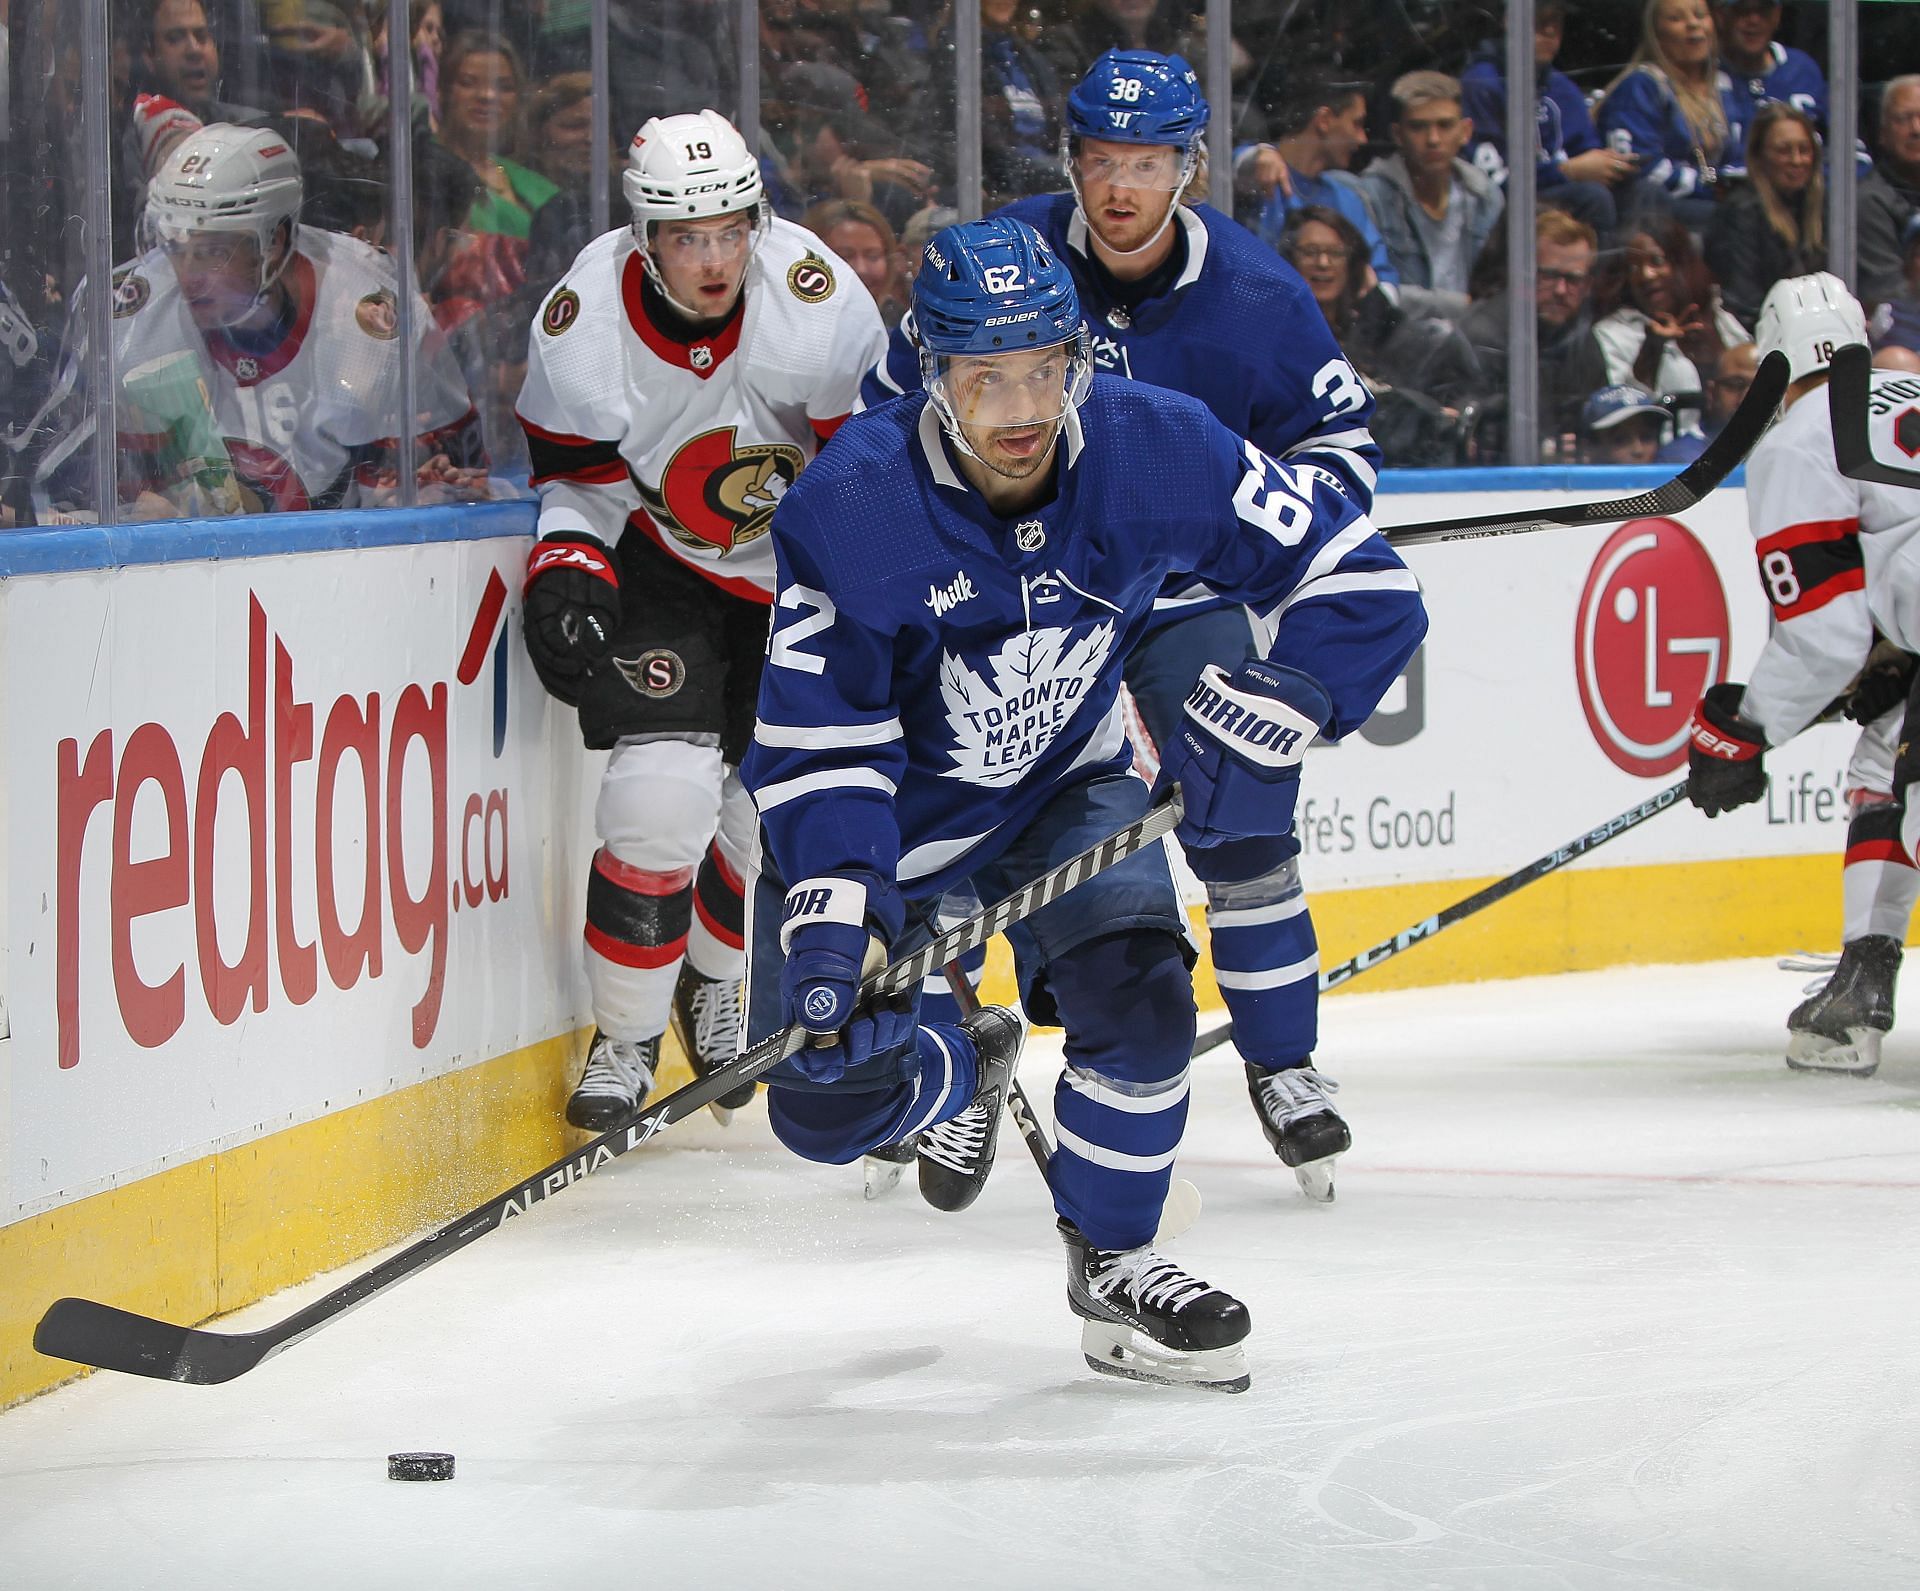 Toronto Maple Leafs vs Ottawa Senators Live streaming options, how and where to watch NHL preseason live on TV, channel list and more